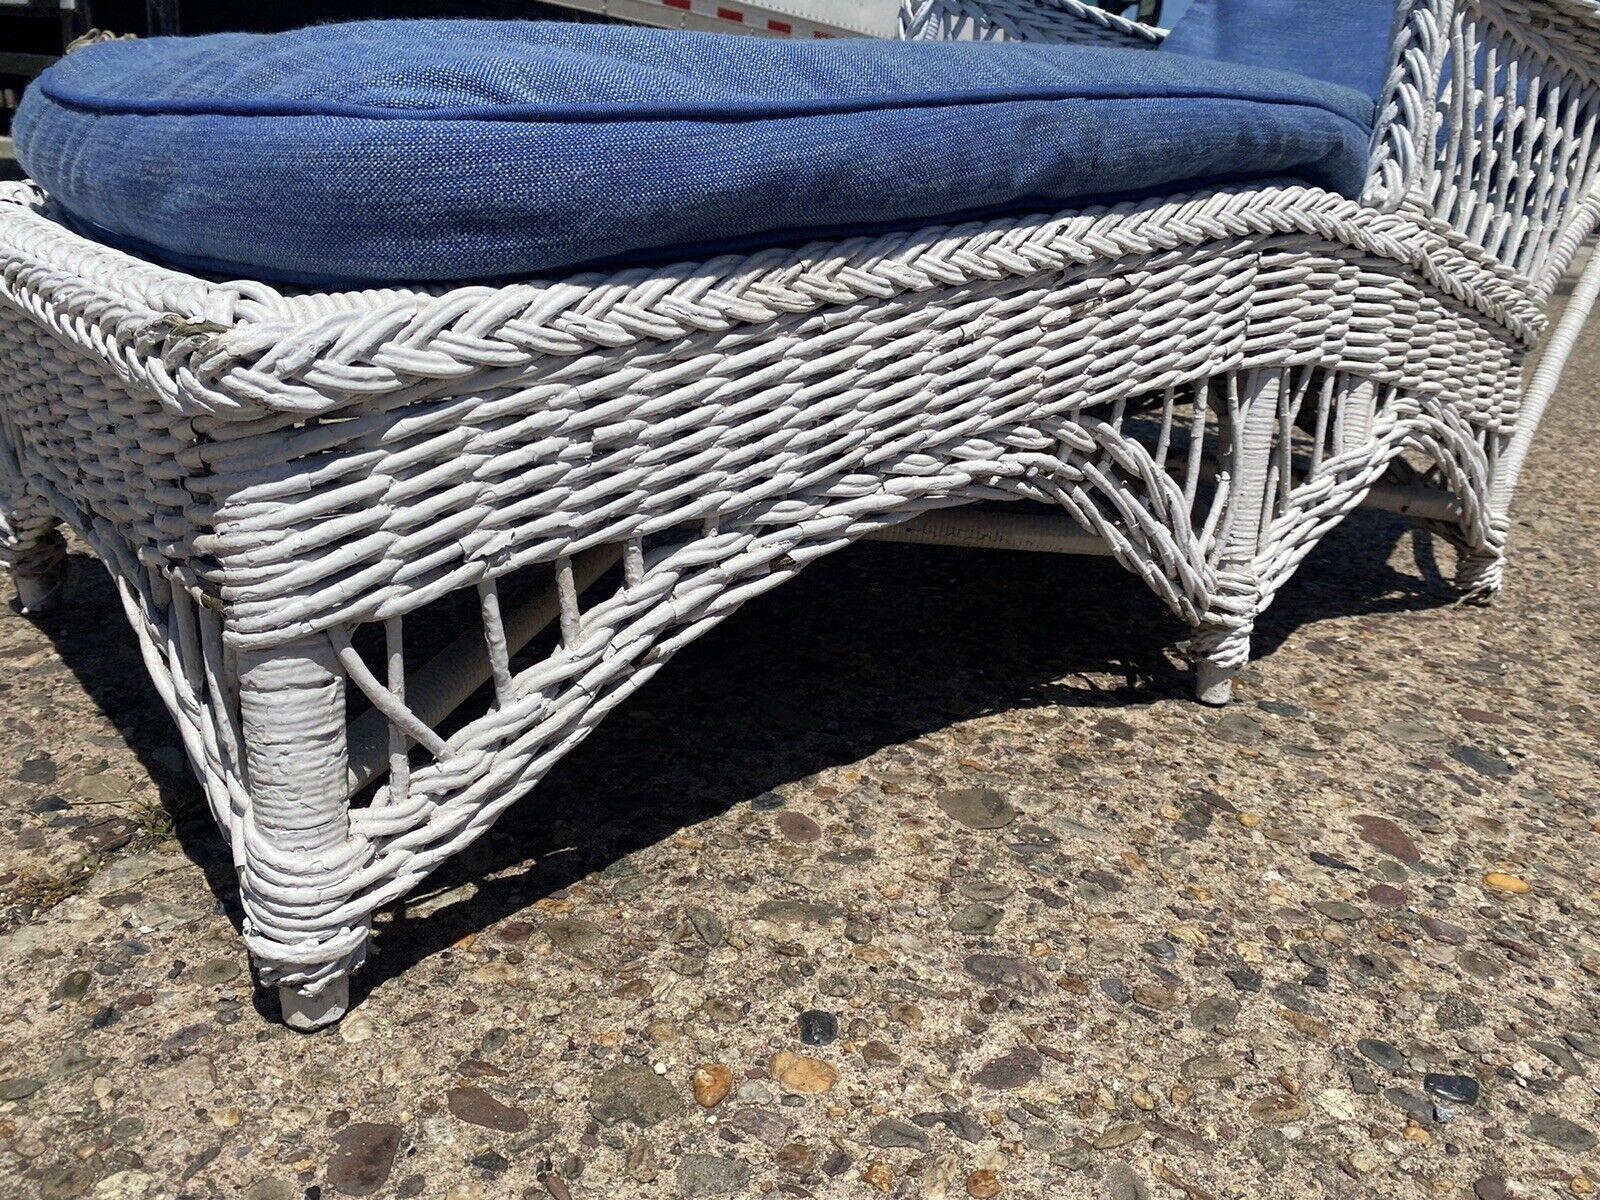 20th Century Antique American Victorian White Wicker Sunroom Chaise Lounge Arm Chair Sofa For Sale